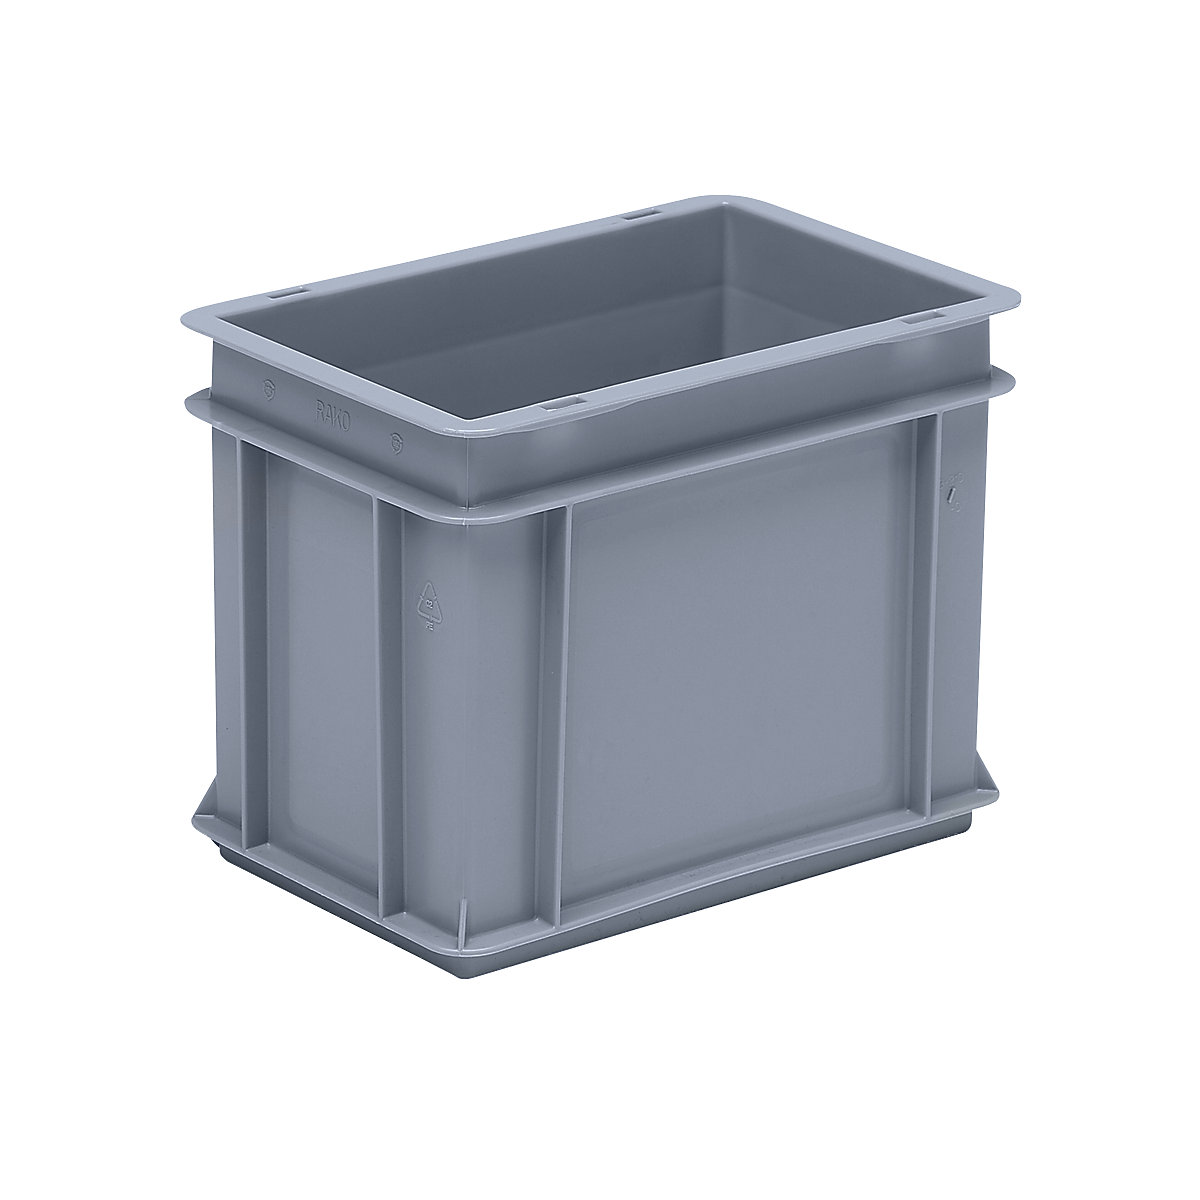 Euro stacking container made of polypropylene (PP), max. load 20 kg, silver grey, capacity 9 l, external height 220 mm, pack of 8